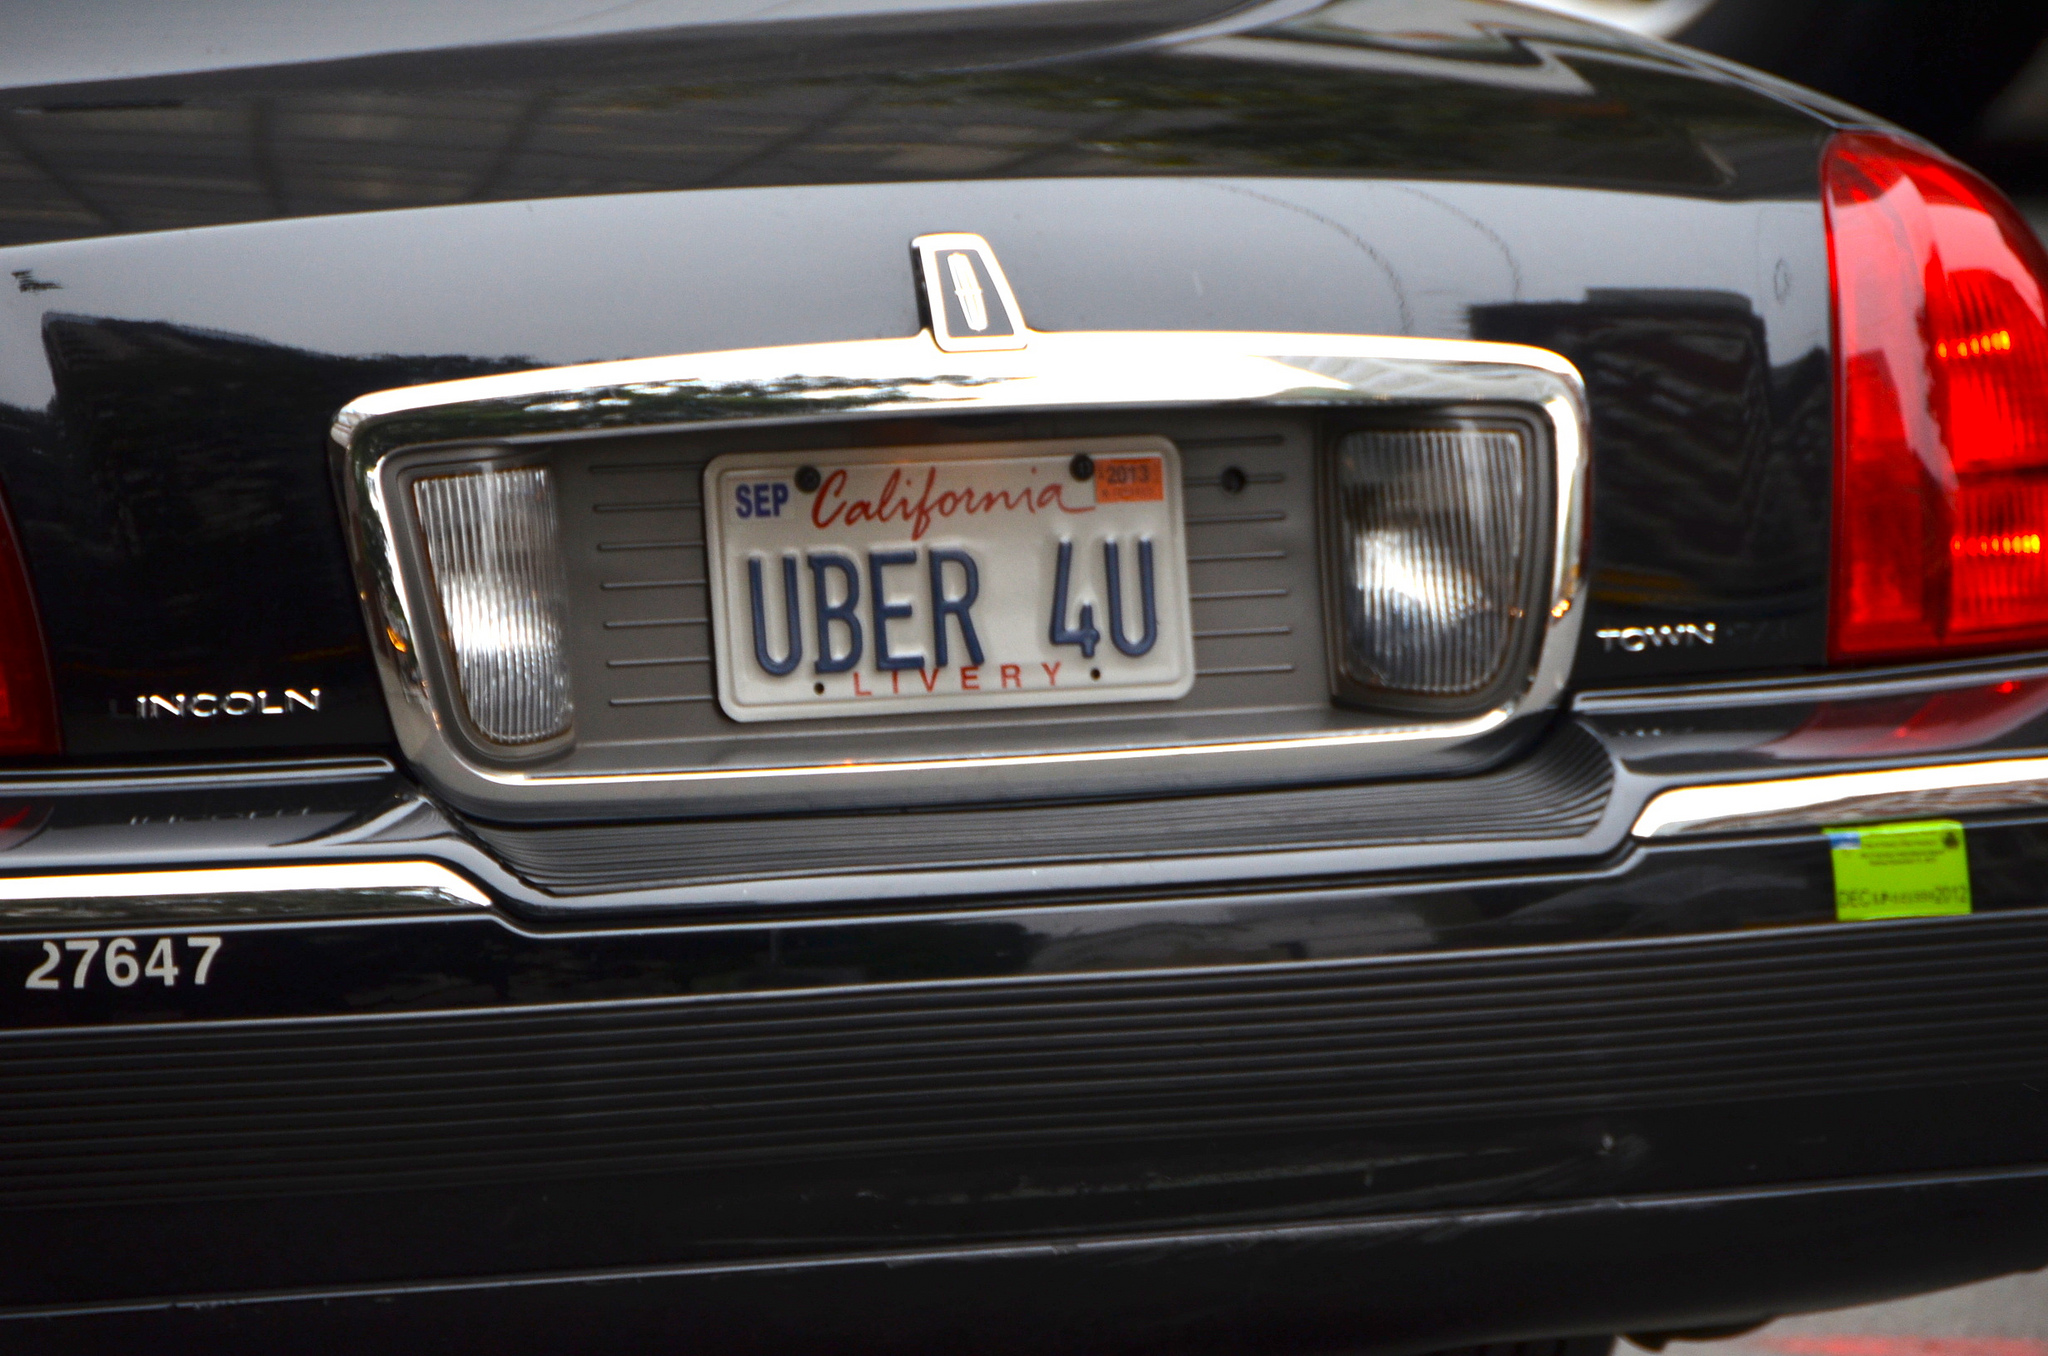 Privacy Group’s FTC Complaint: Uber Shouldn’t Track Users When They’re Not Using The App